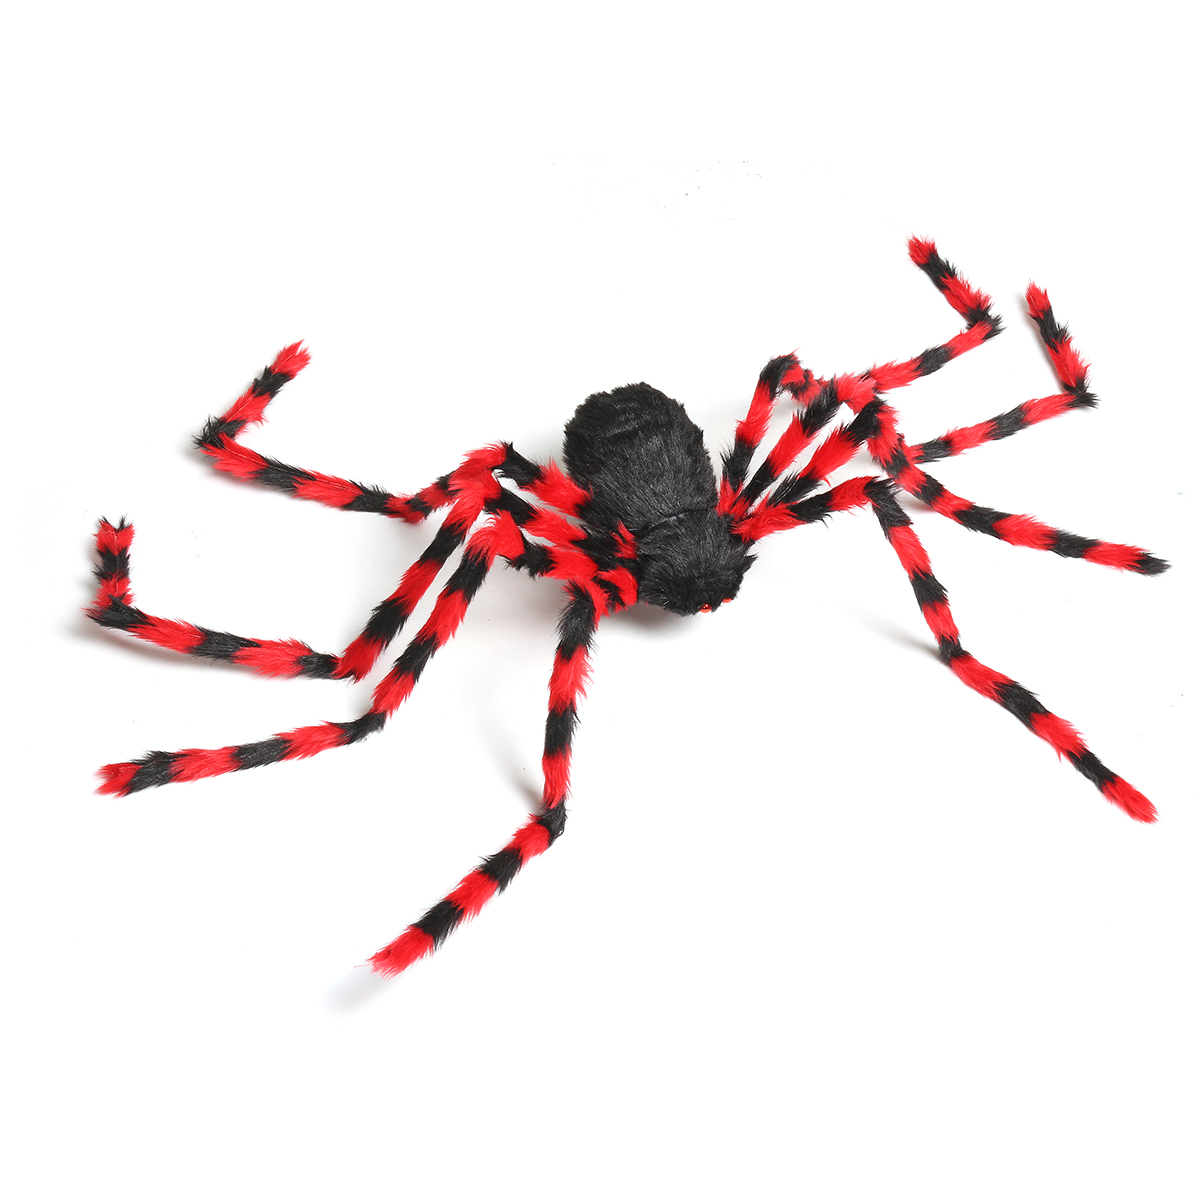 150cm-Horrible-Giant-Furry-Spider-Decorations-Halloween-Haunted-House-Prop-Gift-1589939-7